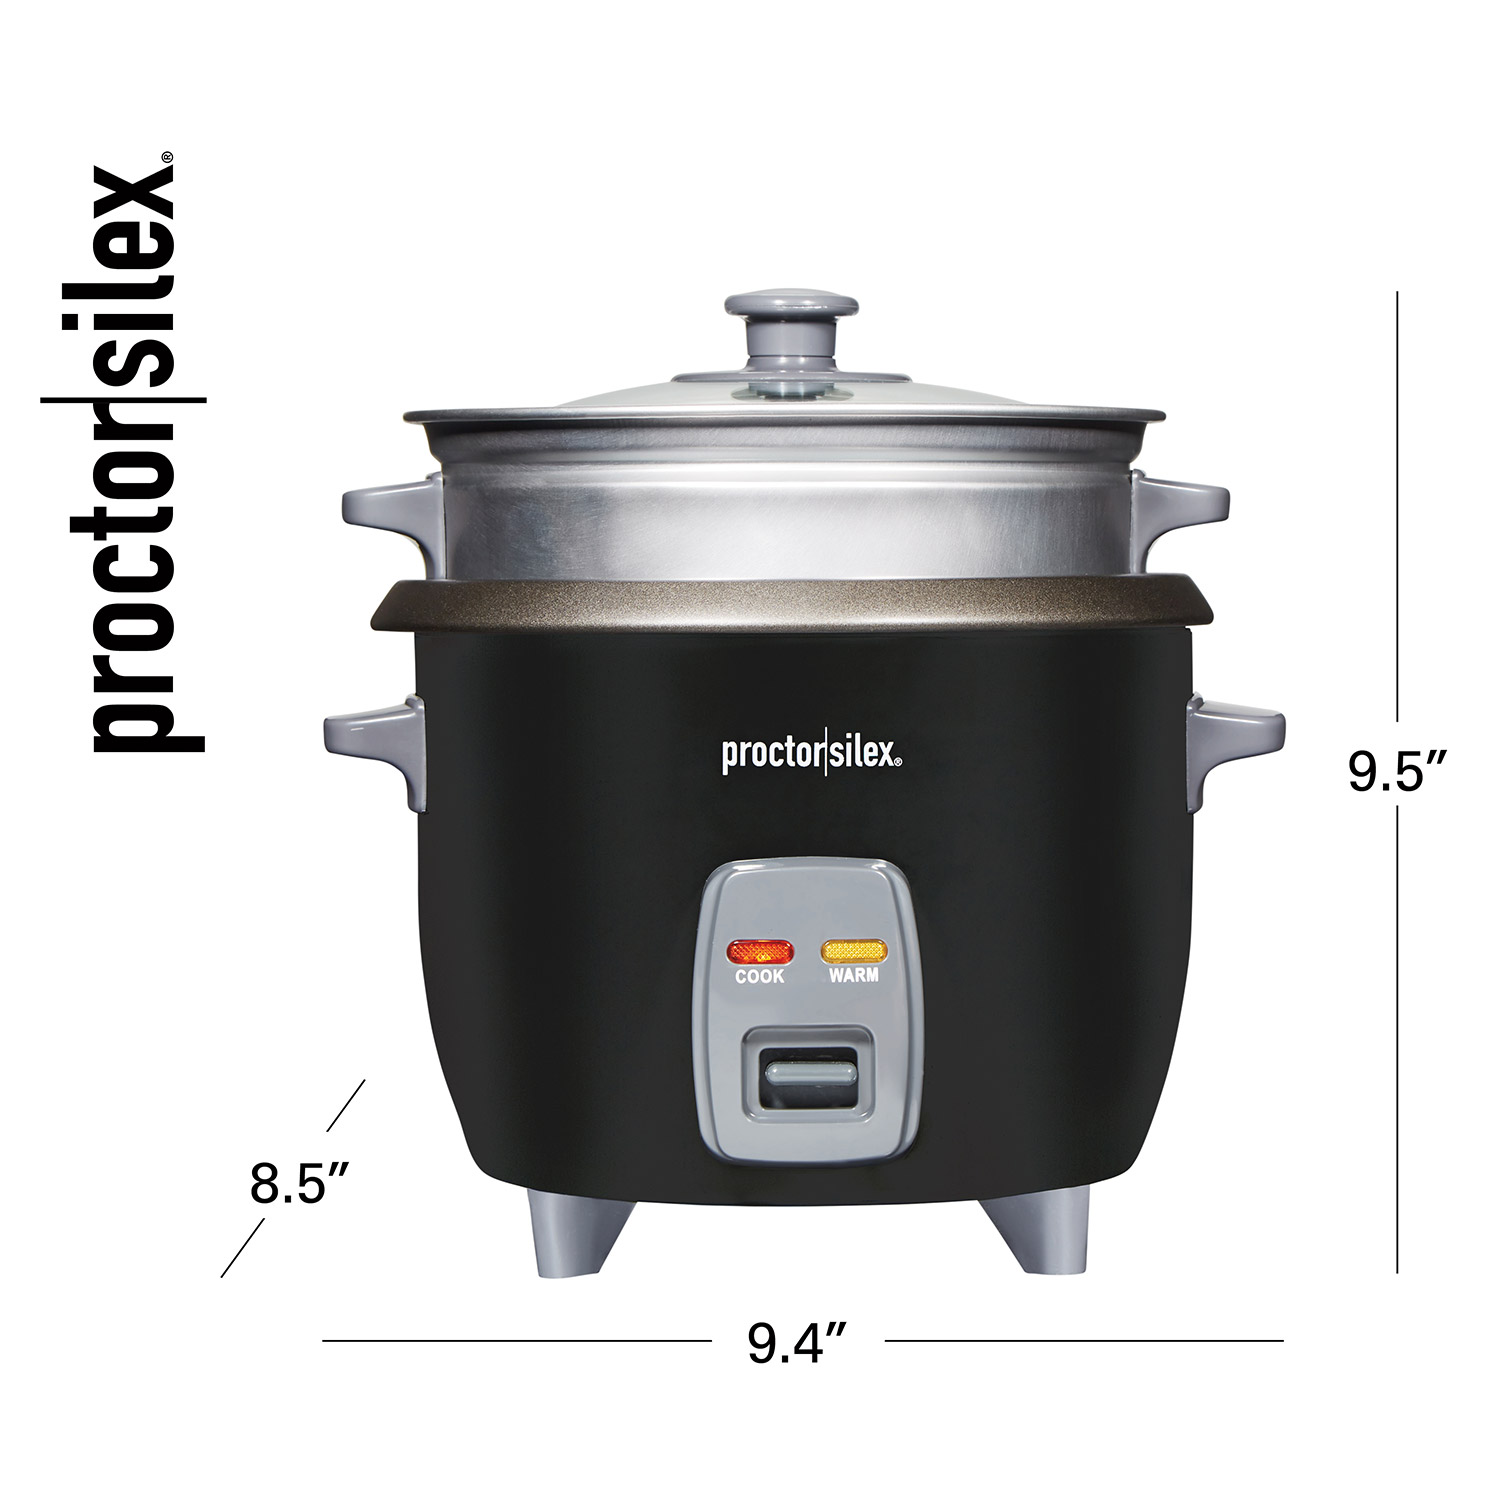 CTL Home Center - Proctor-Silex Rice Cooker makes fluffy